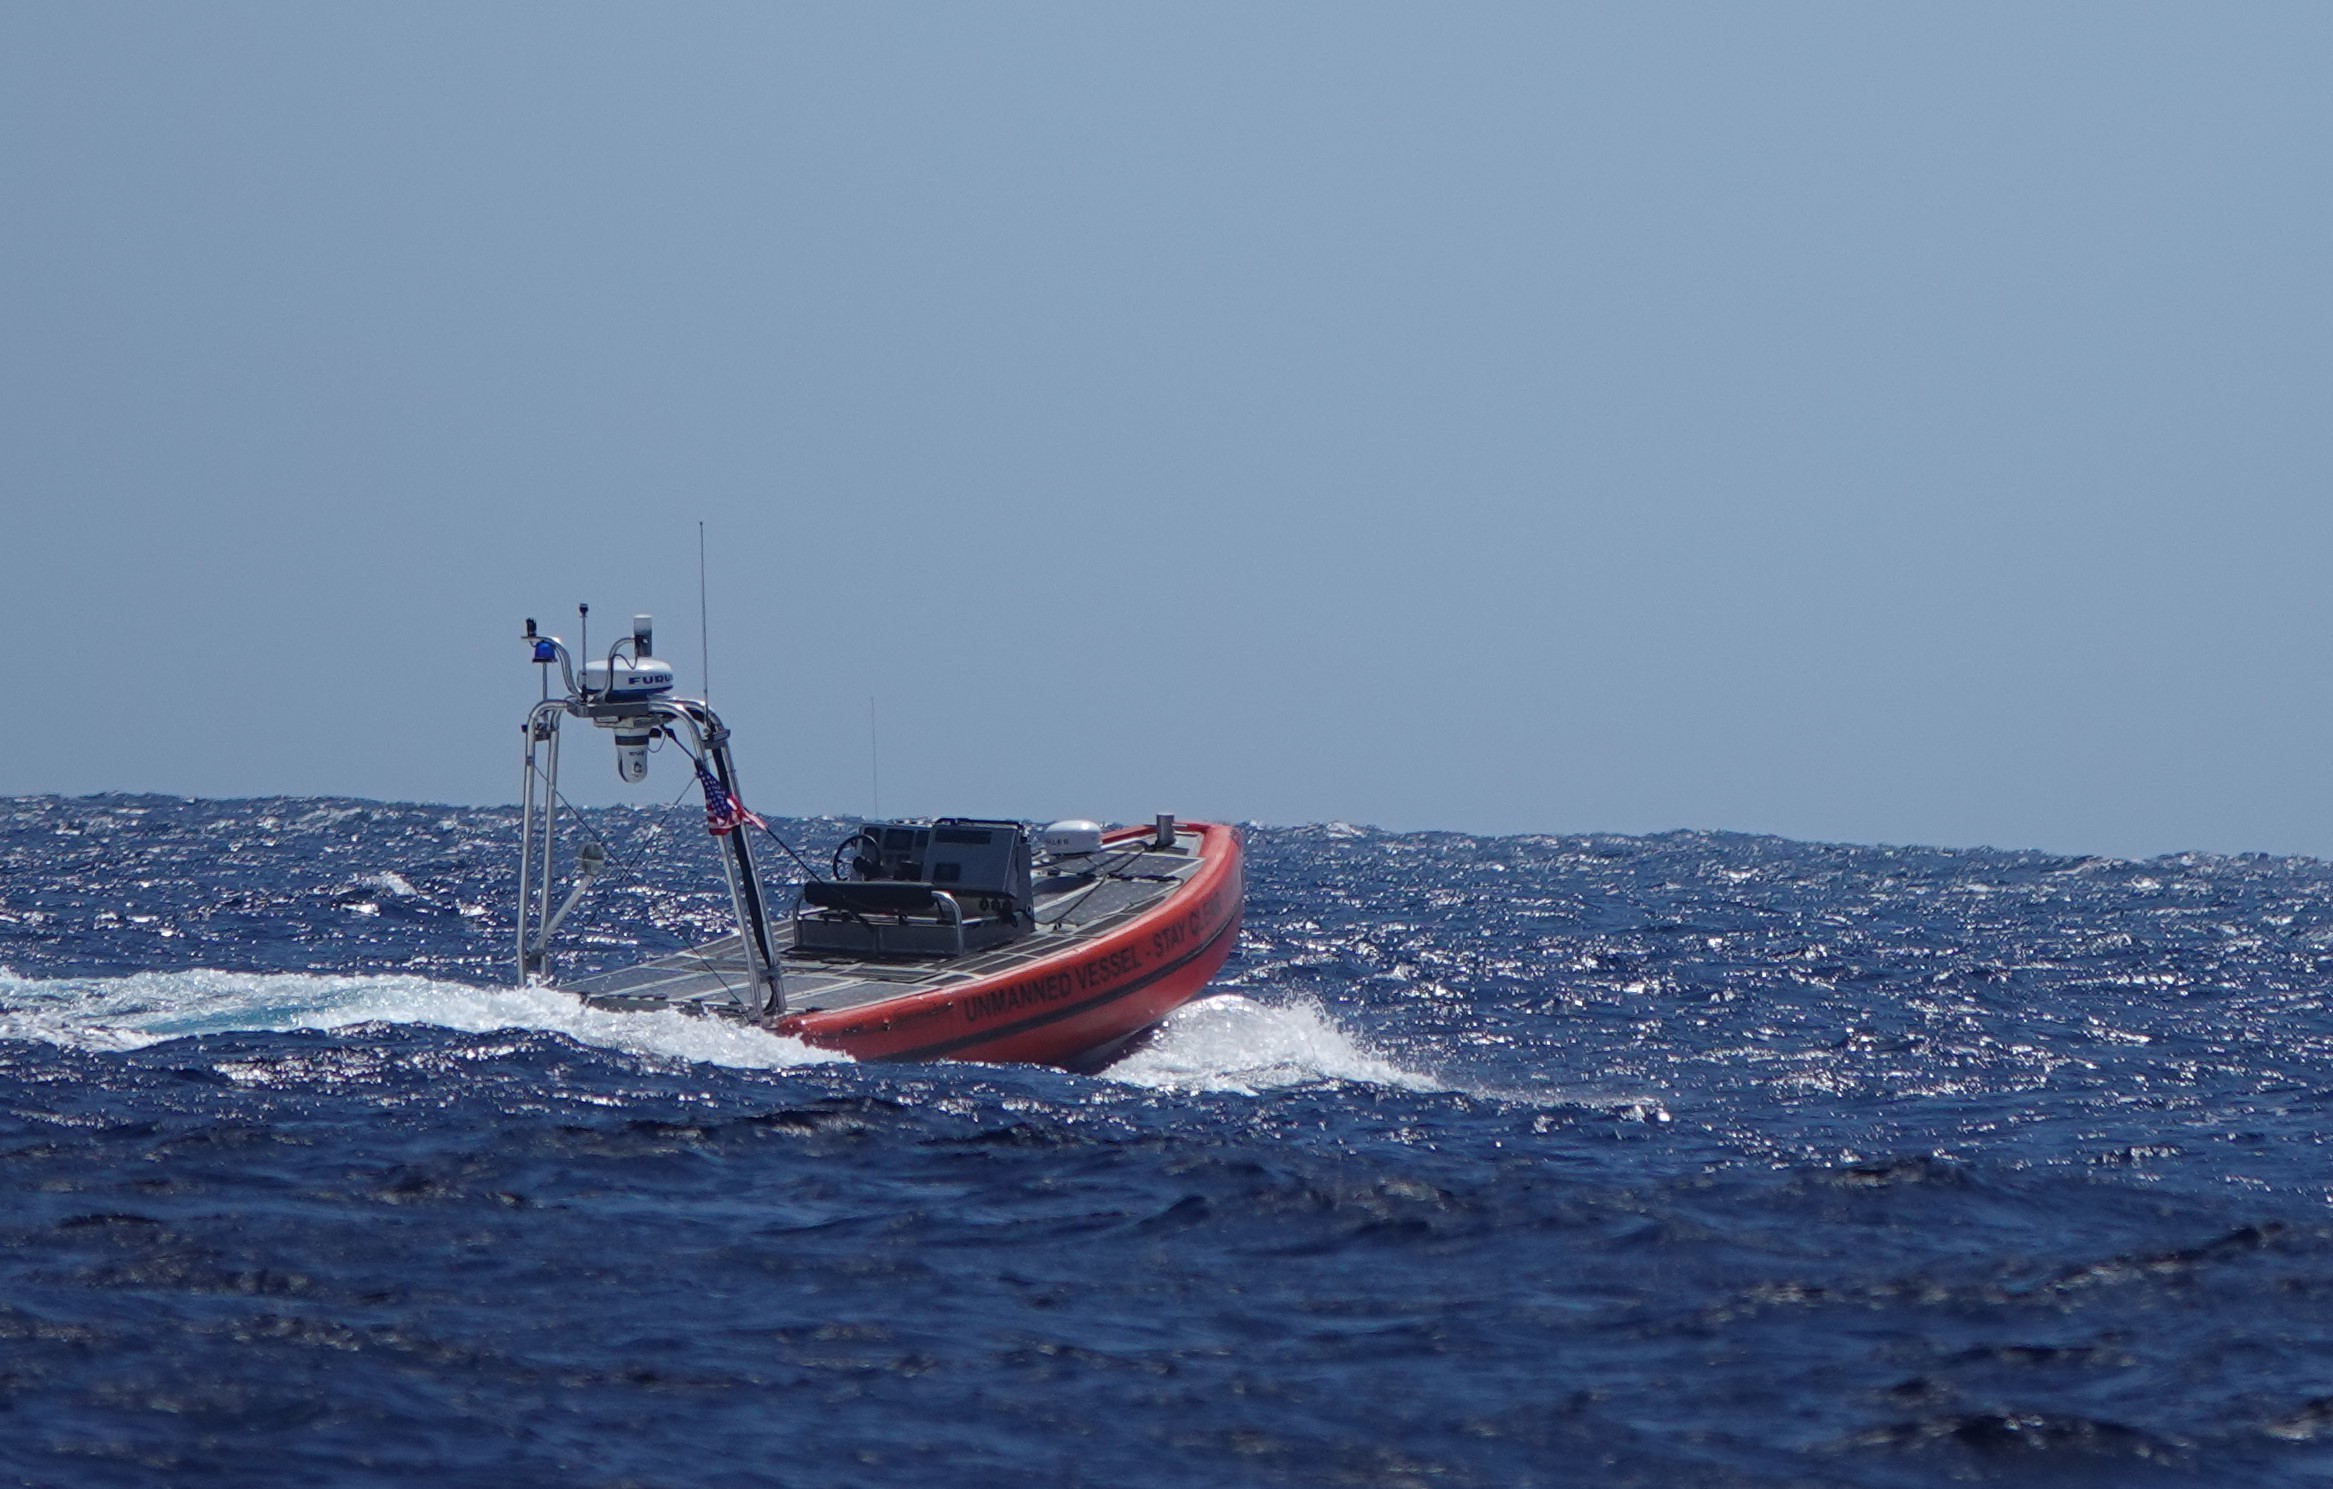 A Coast Guard prototype unmanned surface vehicle performs a test off Oahu, Hawaii, Oct. 7, 2020. The focus of the test was to explore how current and emerging technologies might be used to enhance maritime domain awareness in remote regions. (U.S. Coast Guard photo courtesy of the Coast Guard Research and Development Center/Released) 